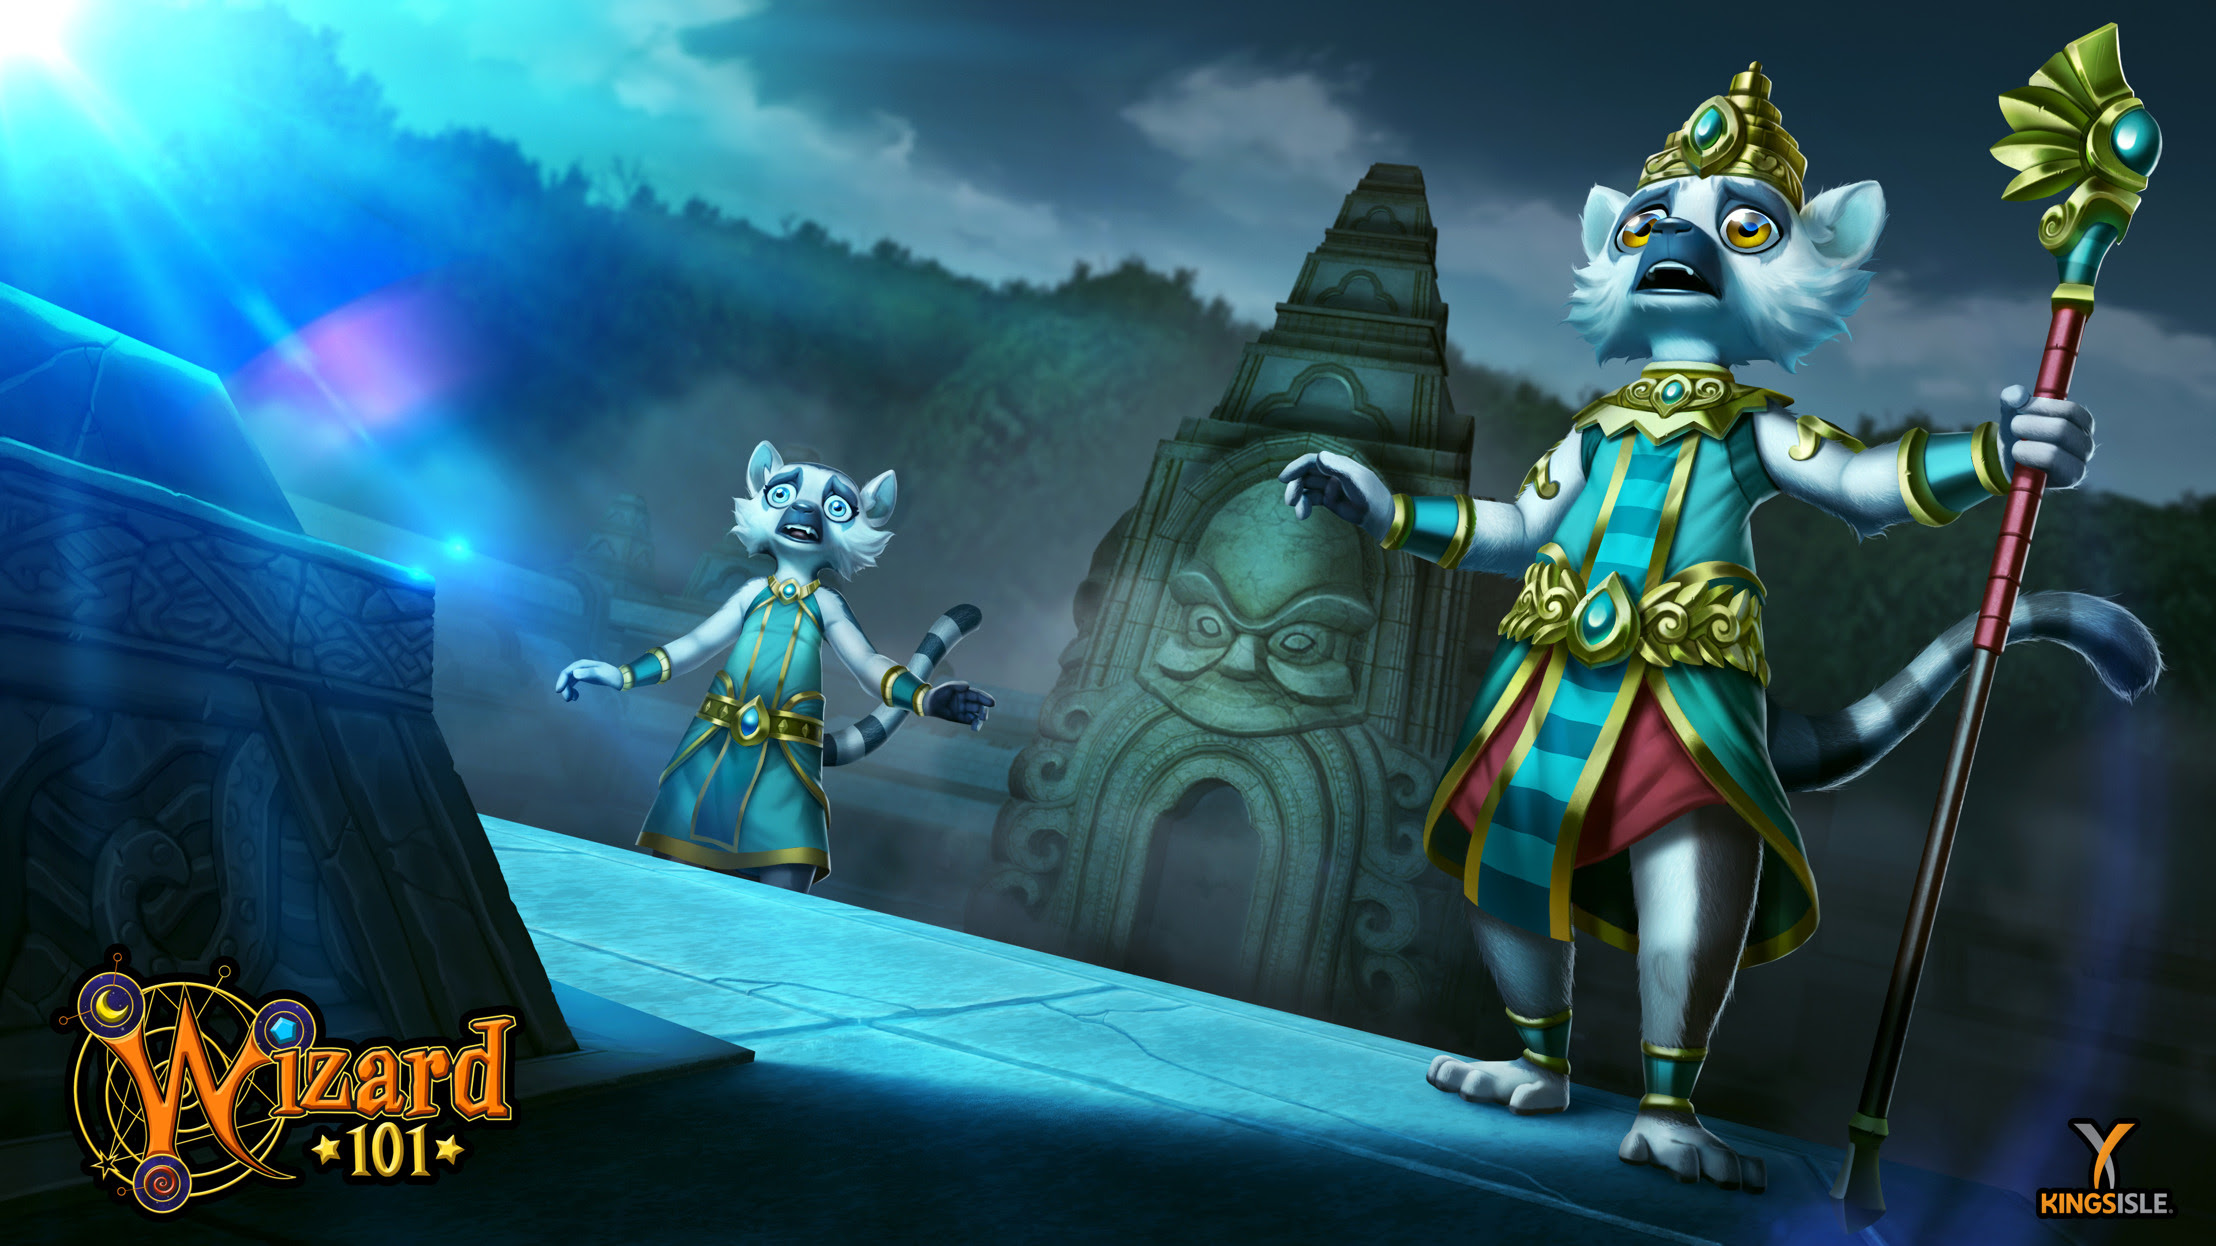 Wizard101’s HighlyAnticipated New World Update ‘Lemuria’ Now Available